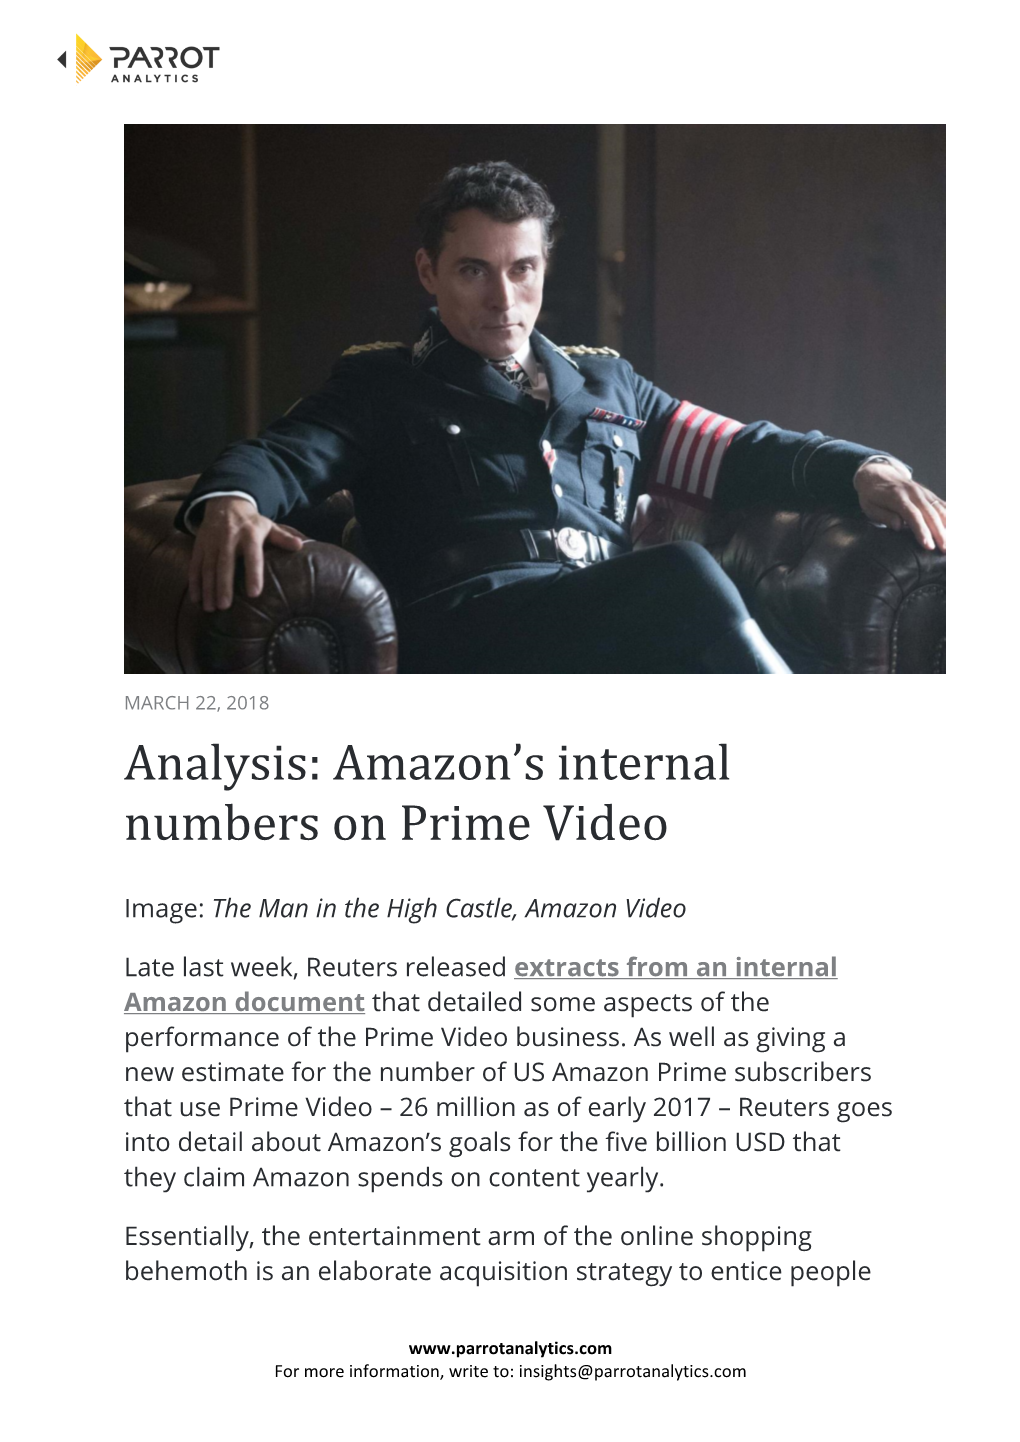 Analysis: Amazon's Internal Numbers on Prime Video